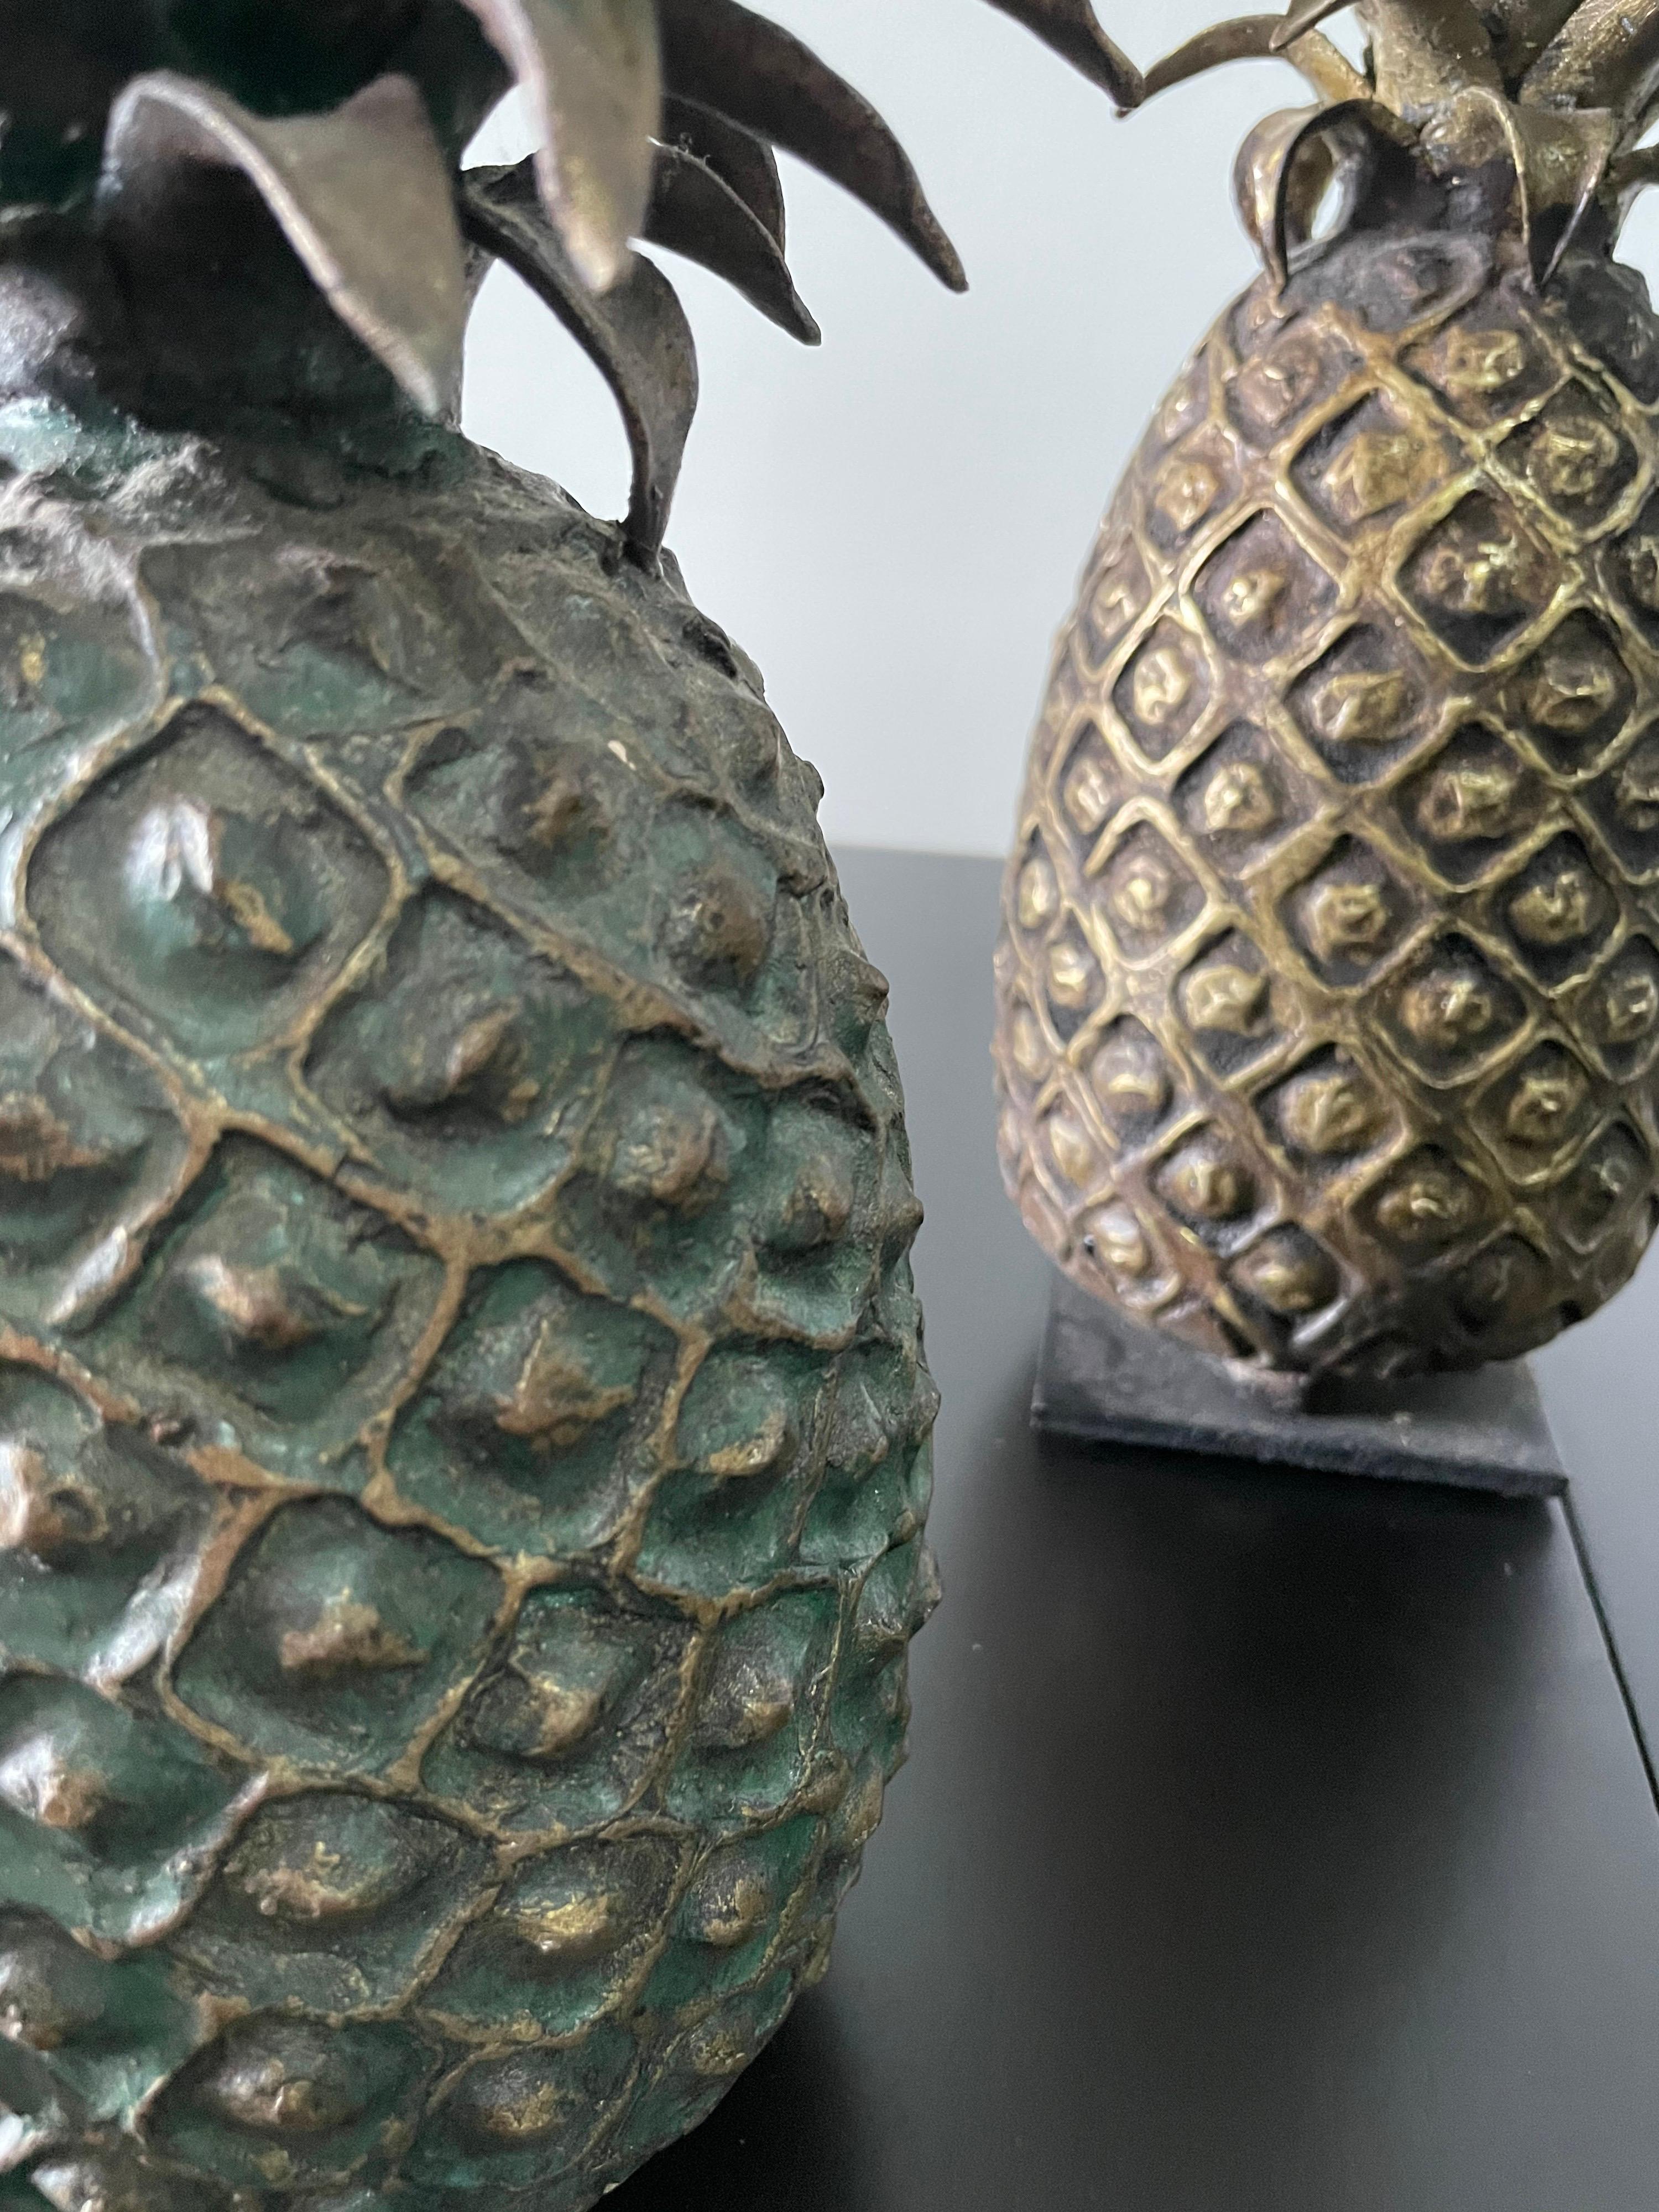 Ivorian Grouping of 4 Vintage Lost Wax Bronze Pineapple Sculptures from Ivory Coast